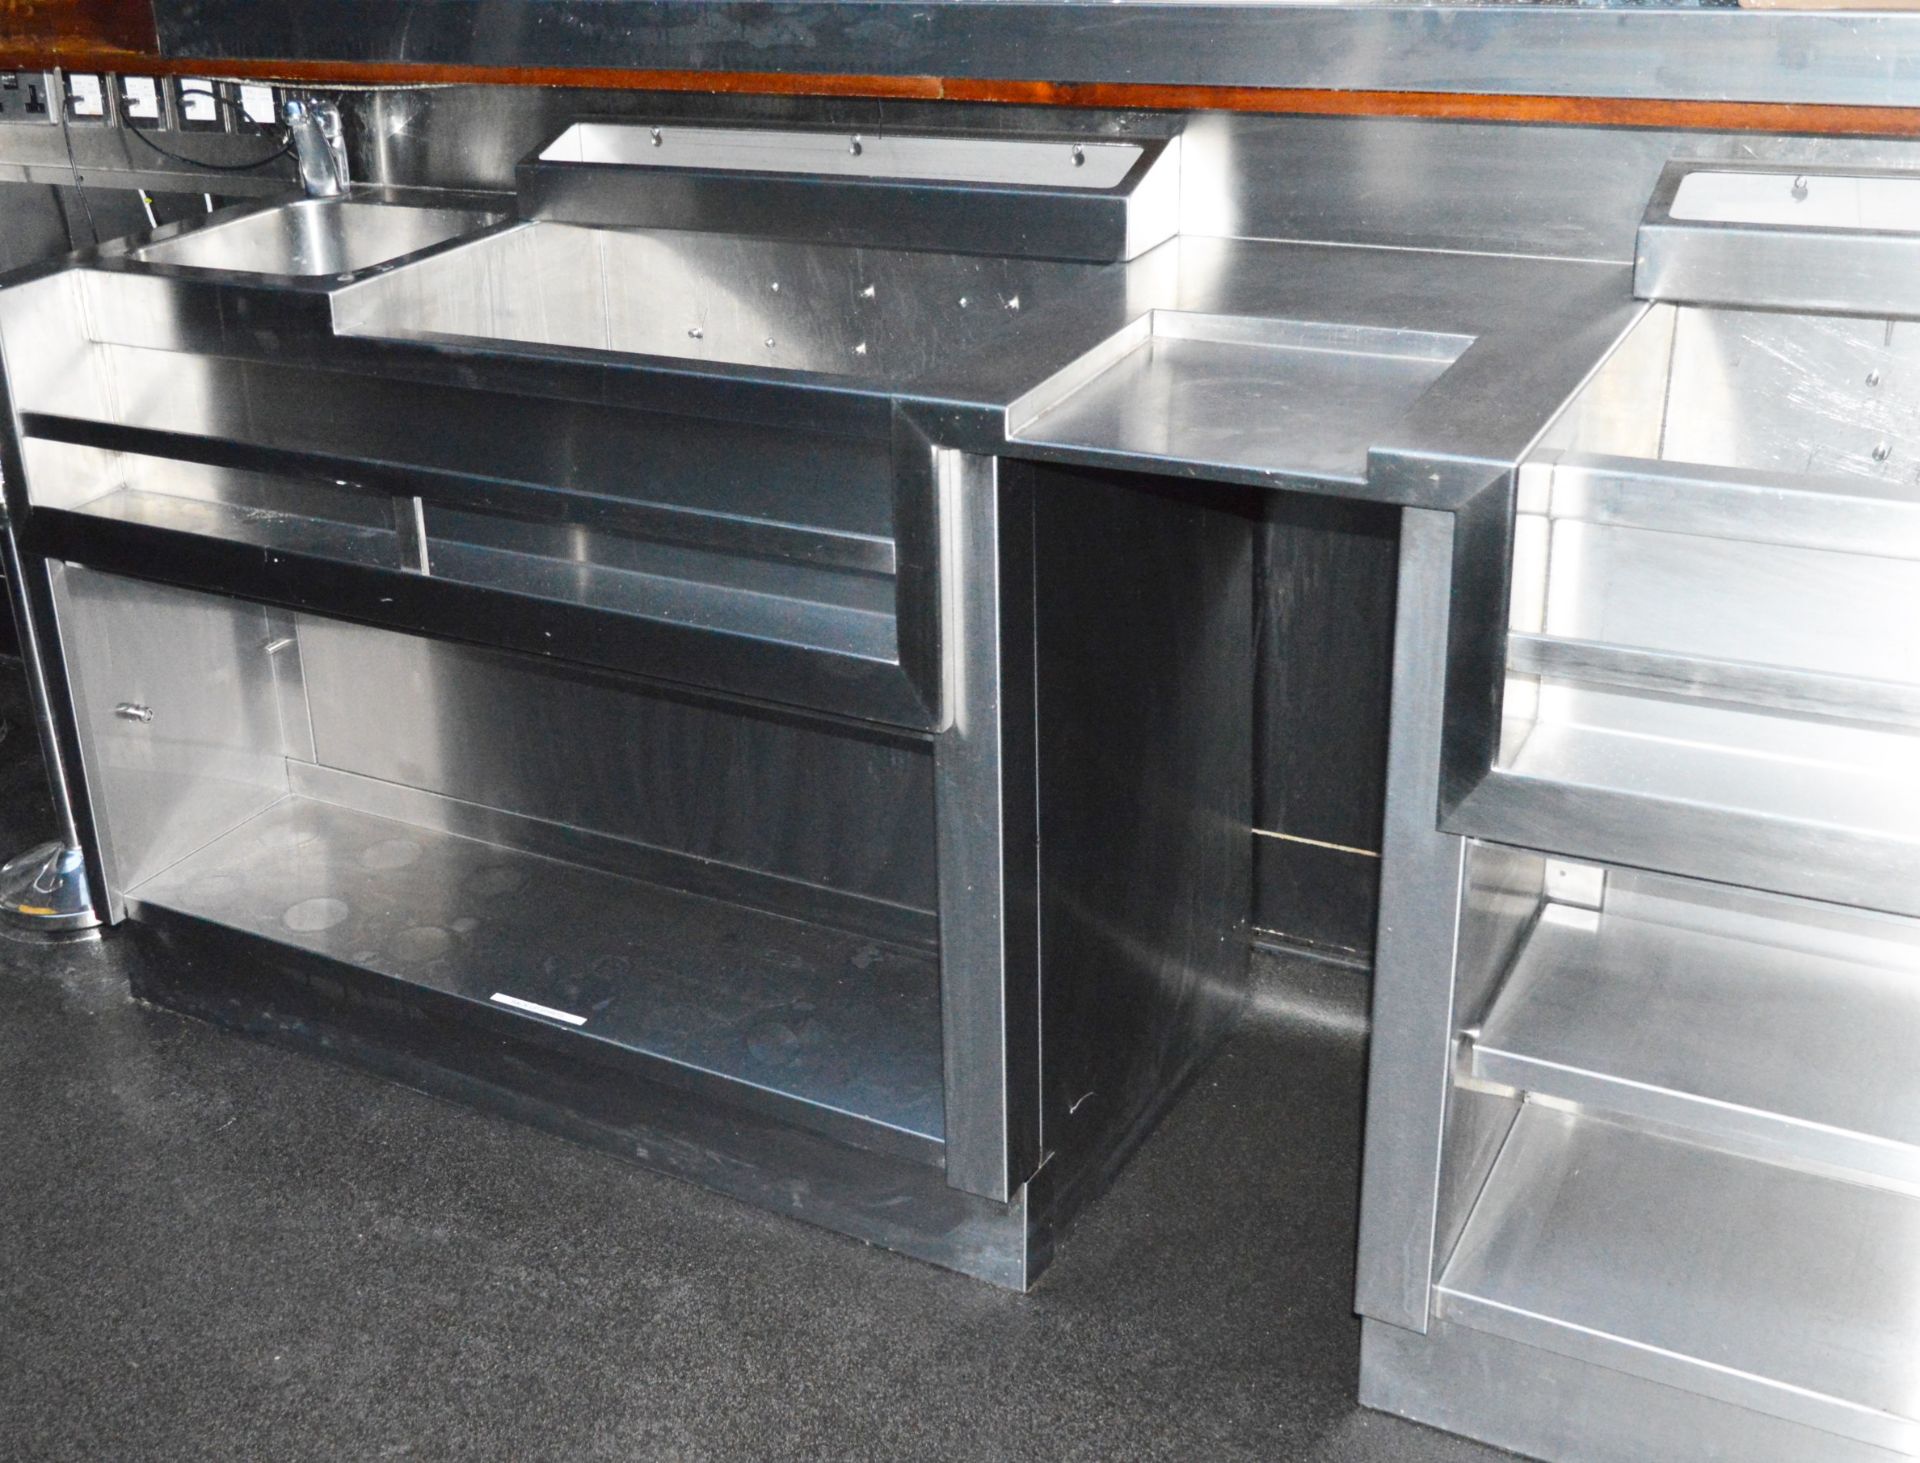 1 x Stainless Steel Double Speed Bar With Two Ice Wells and Two Sink Basins - More Info to - Image 11 of 13